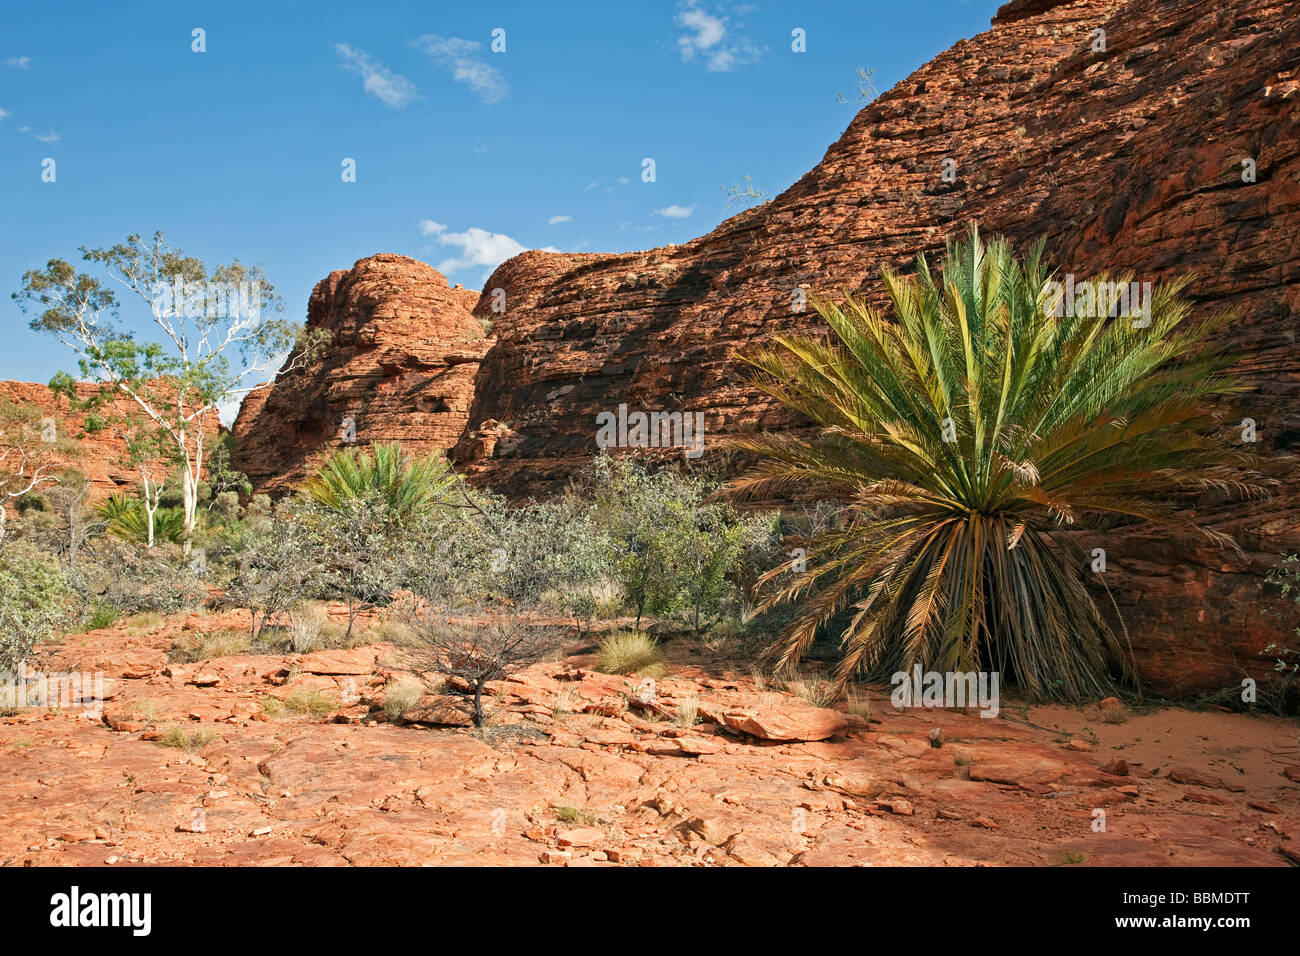 Australia, Northern Territory. Red rock formations and palms at Kings Canyon. Stock Photo